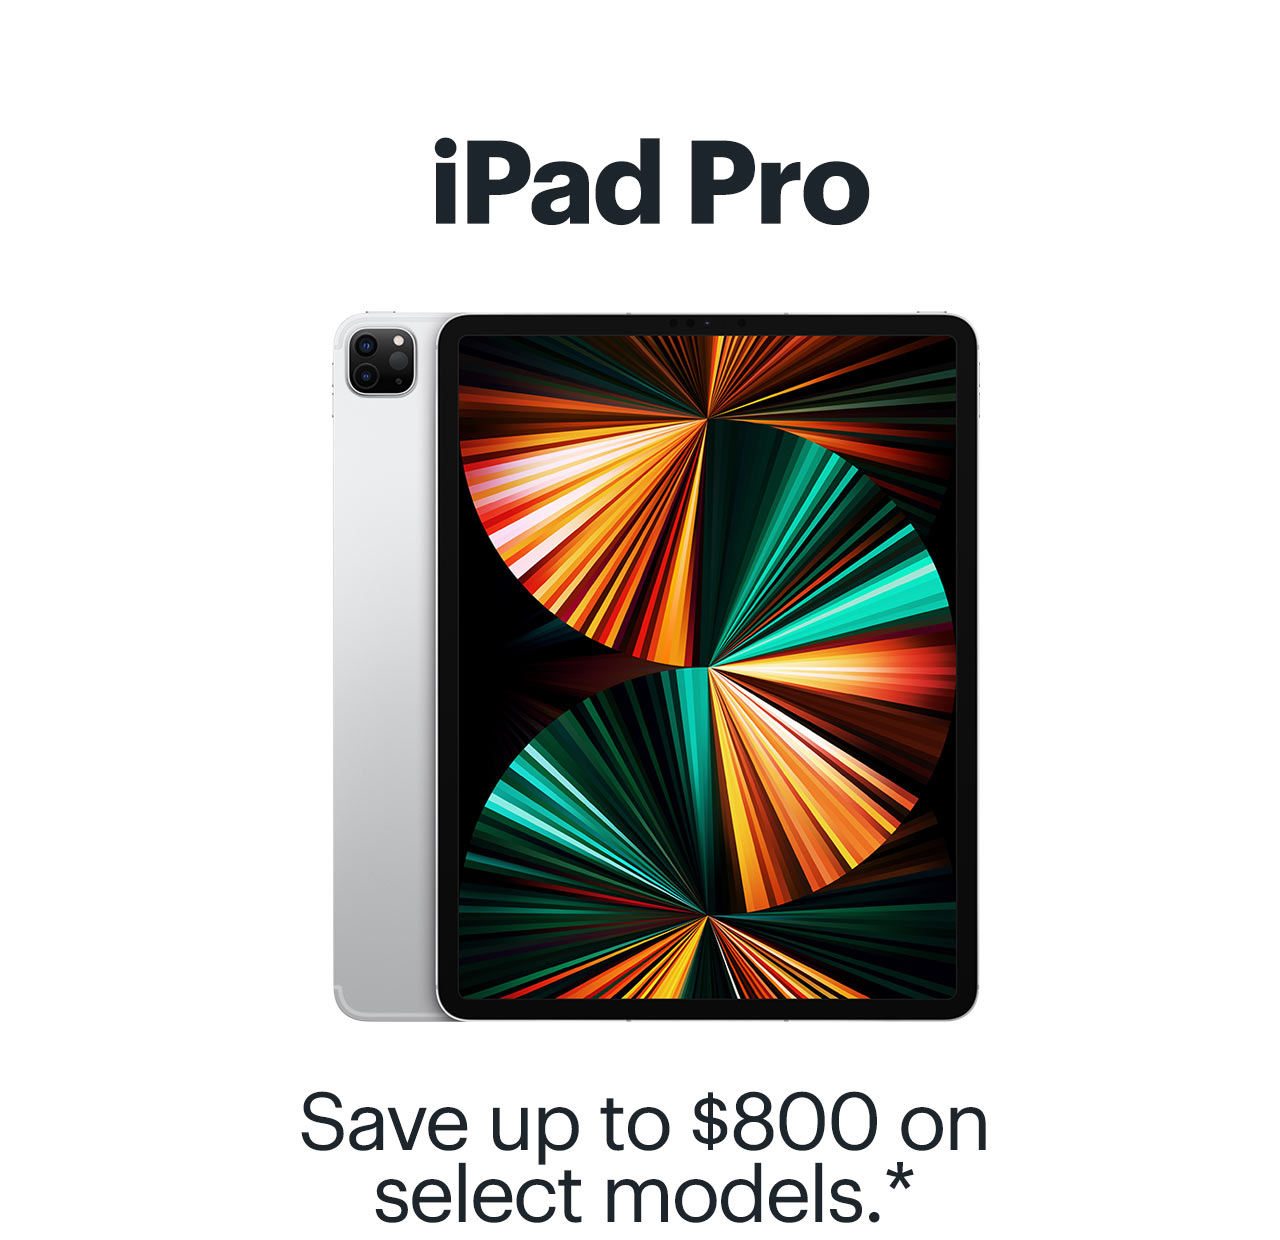 iPad Pro: Save up to $800 on select models. Reference disclaimer.